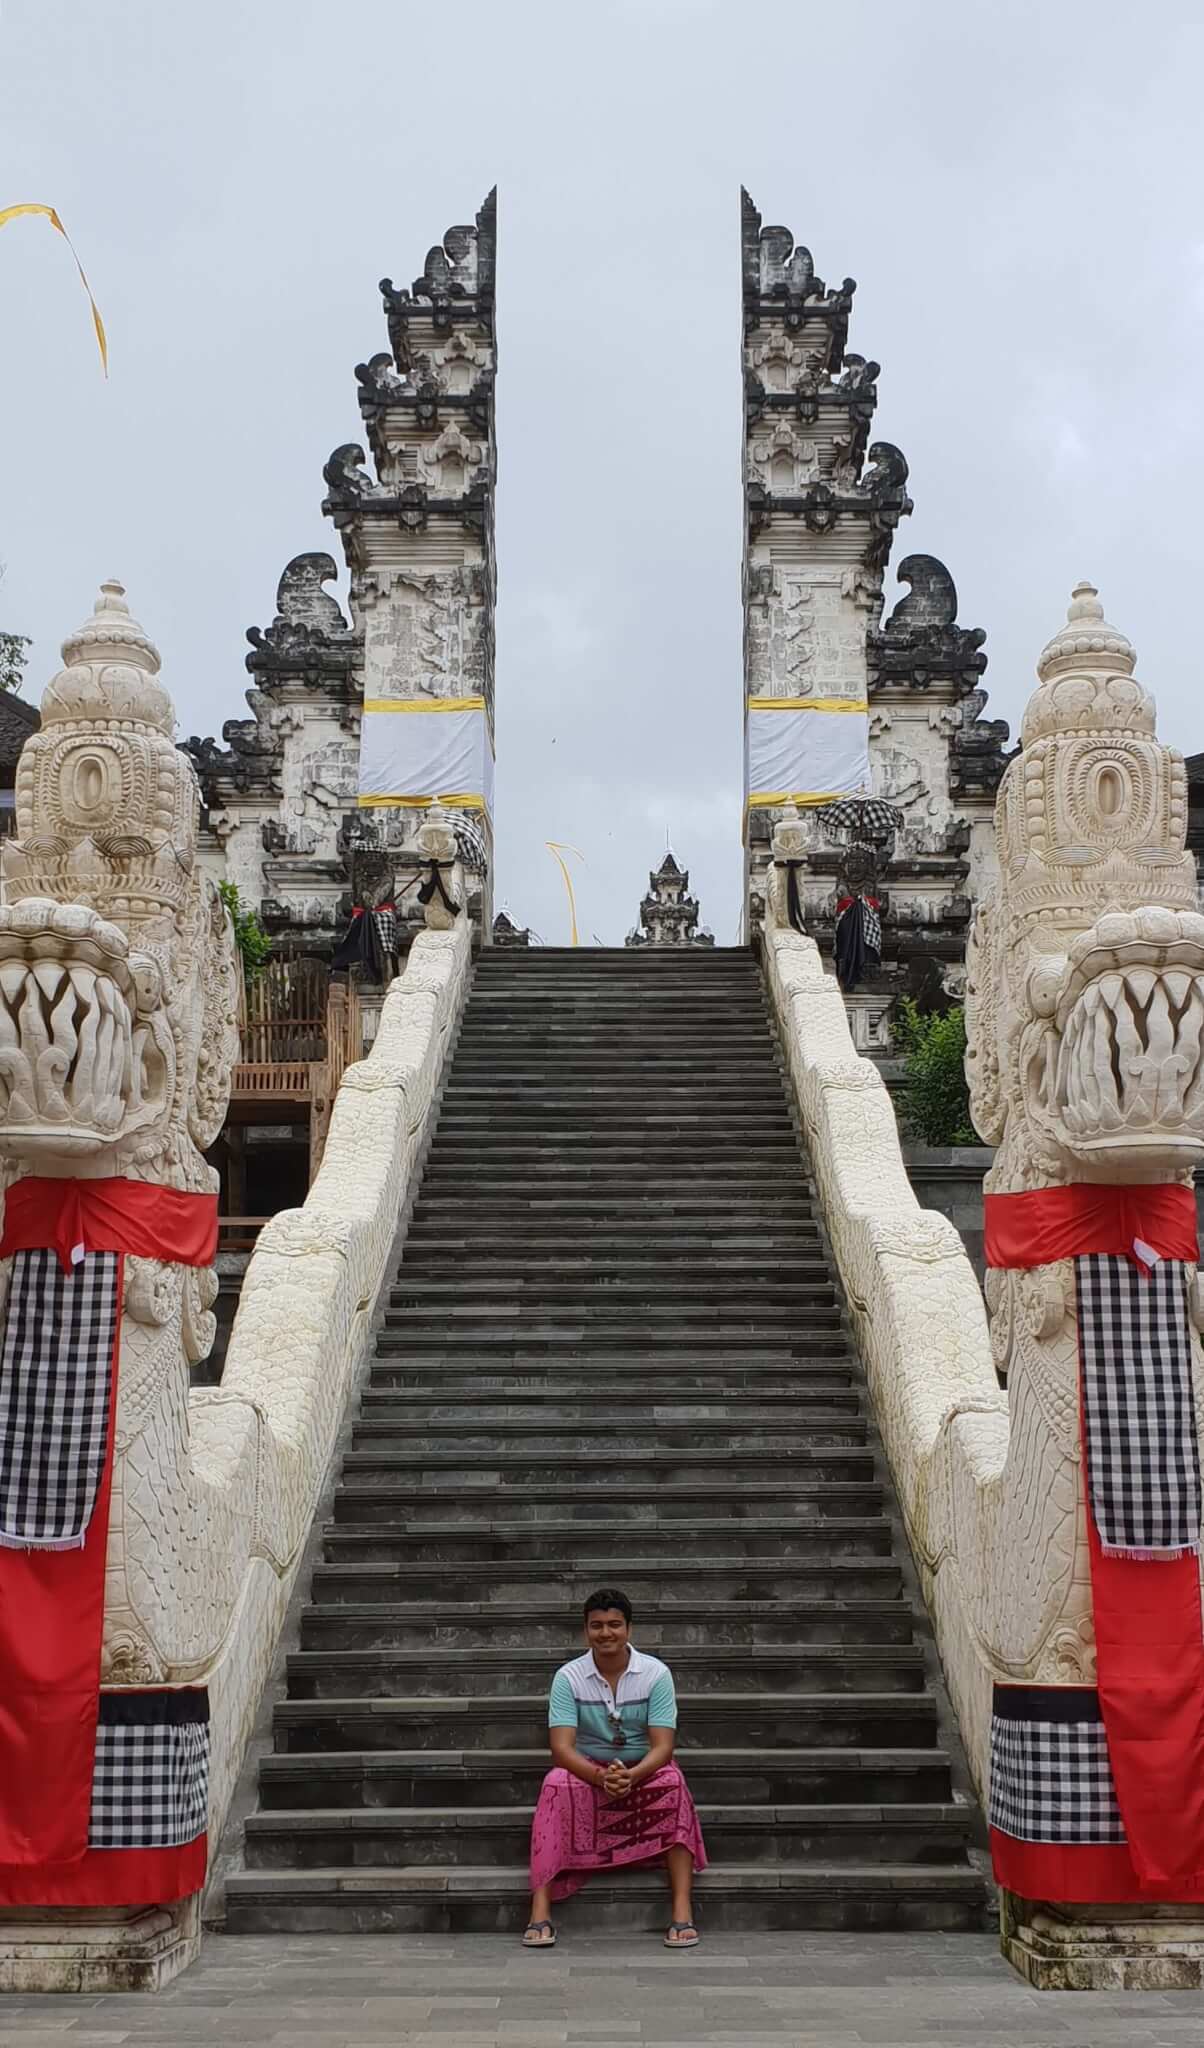 You can skip the Temple of Lempuyang Luhur in your Ubud itinerary if you're only going there for that photoshopped image of the gates because in reality, it isn't that beautiful